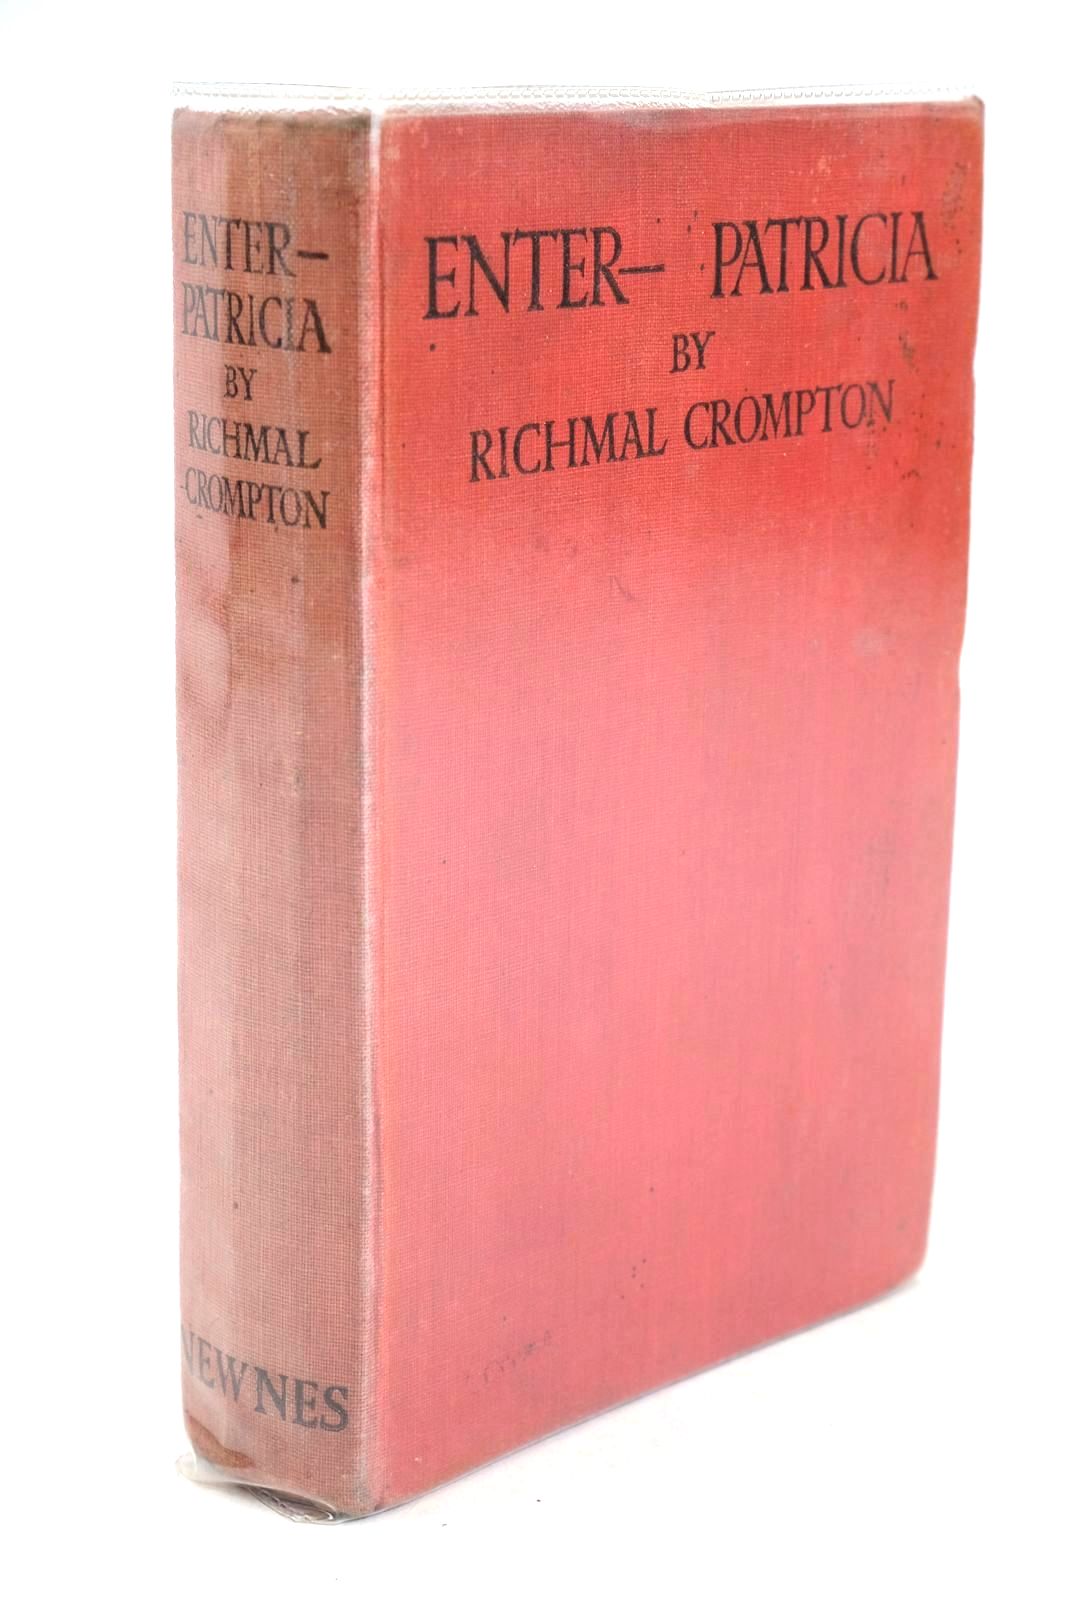 Photo of ENTER- PATRICIA written by Crompton, Richmal published by George Newnes Limited (STOCK CODE: 1326159)  for sale by Stella & Rose's Books